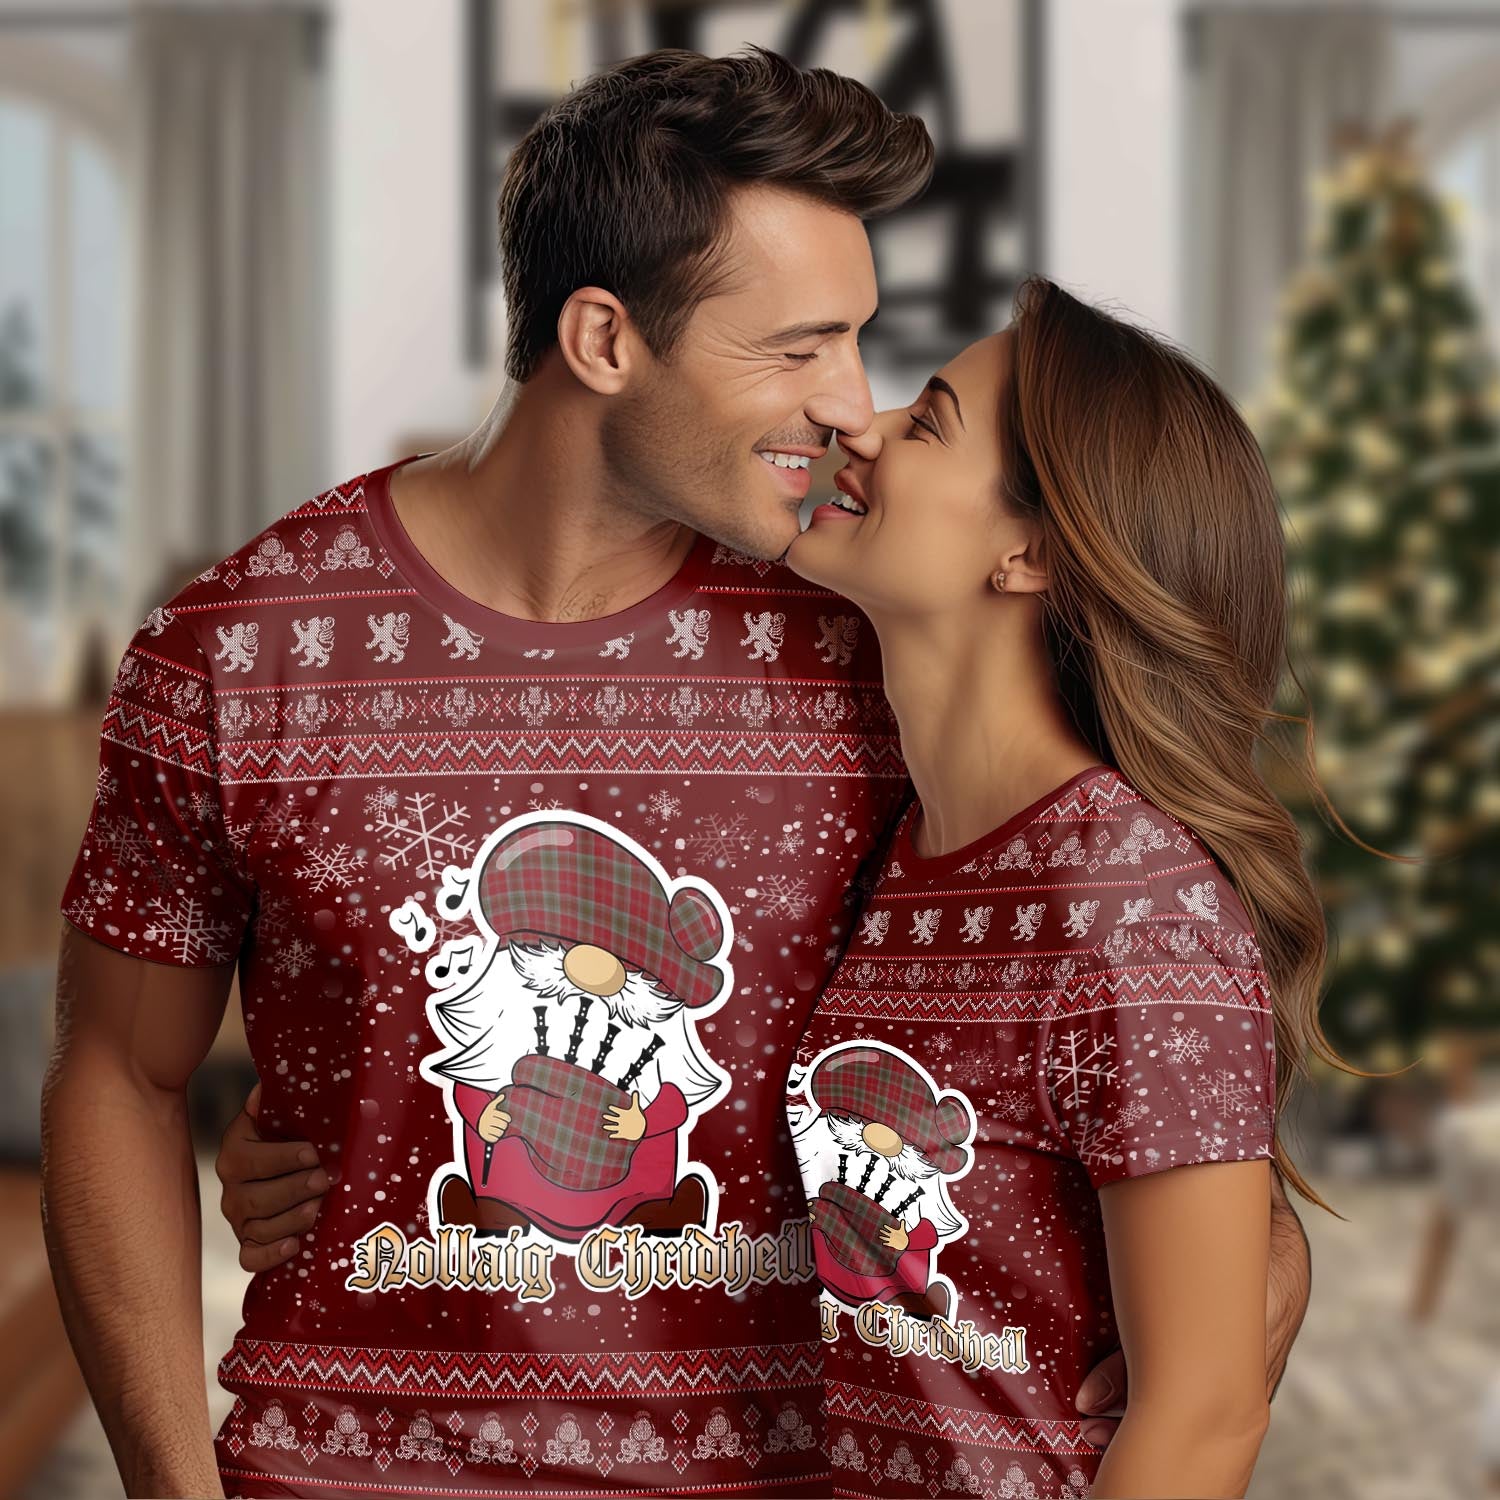 Lindsay Weathered Clan Christmas Family T-Shirt with Funny Gnome Playing Bagpipes Women's Shirt Red - Tartanvibesclothing